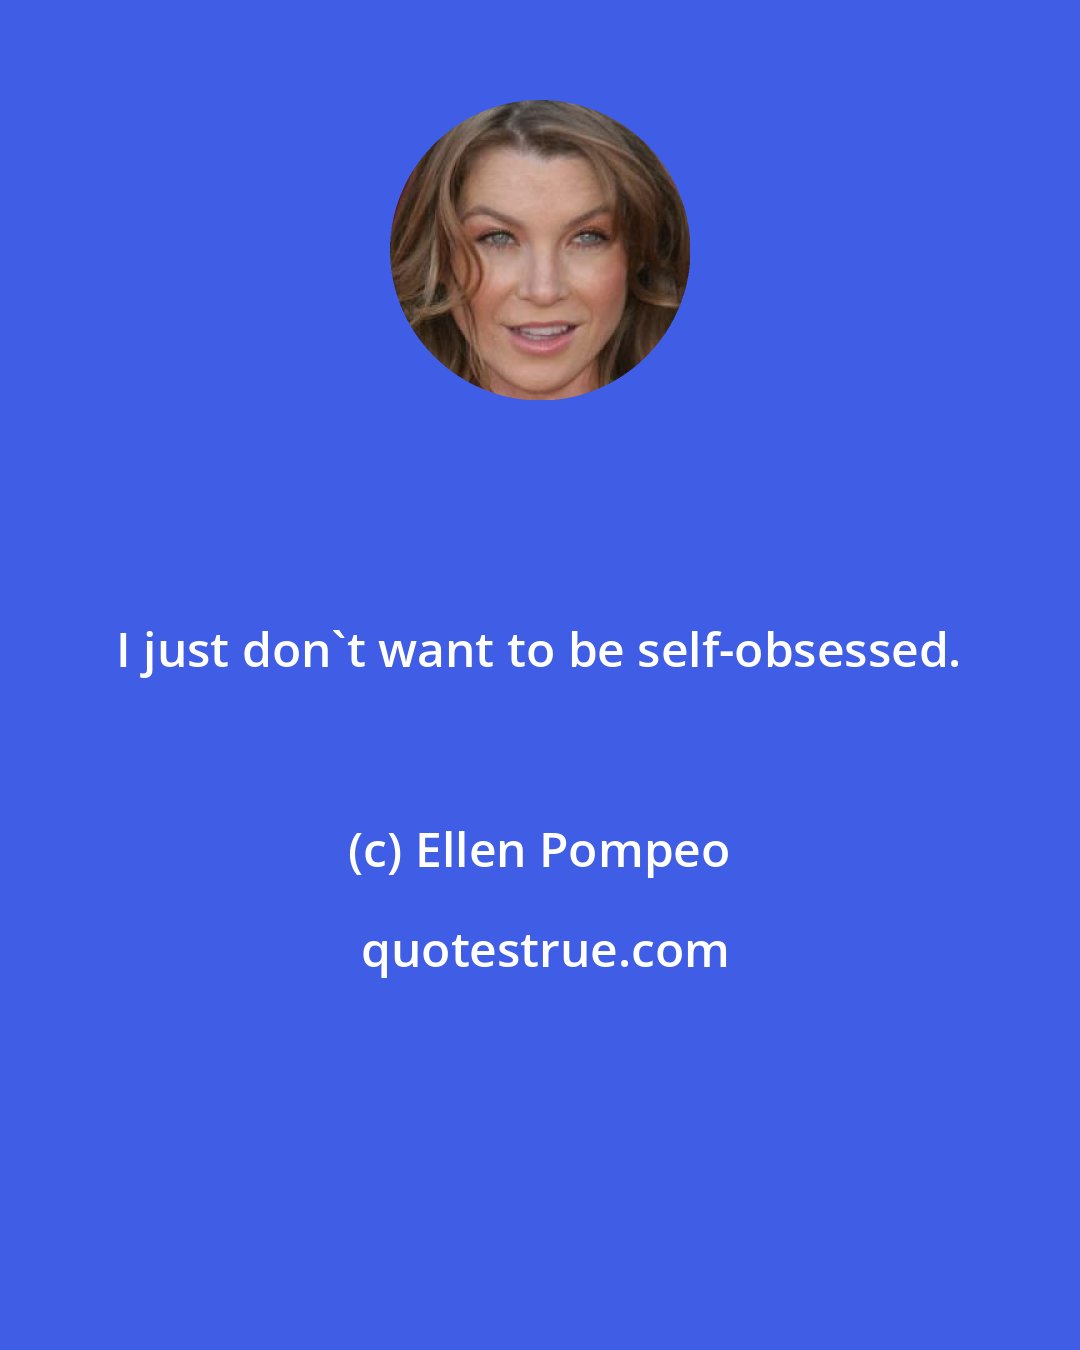 Ellen Pompeo: I just don't want to be self-obsessed.